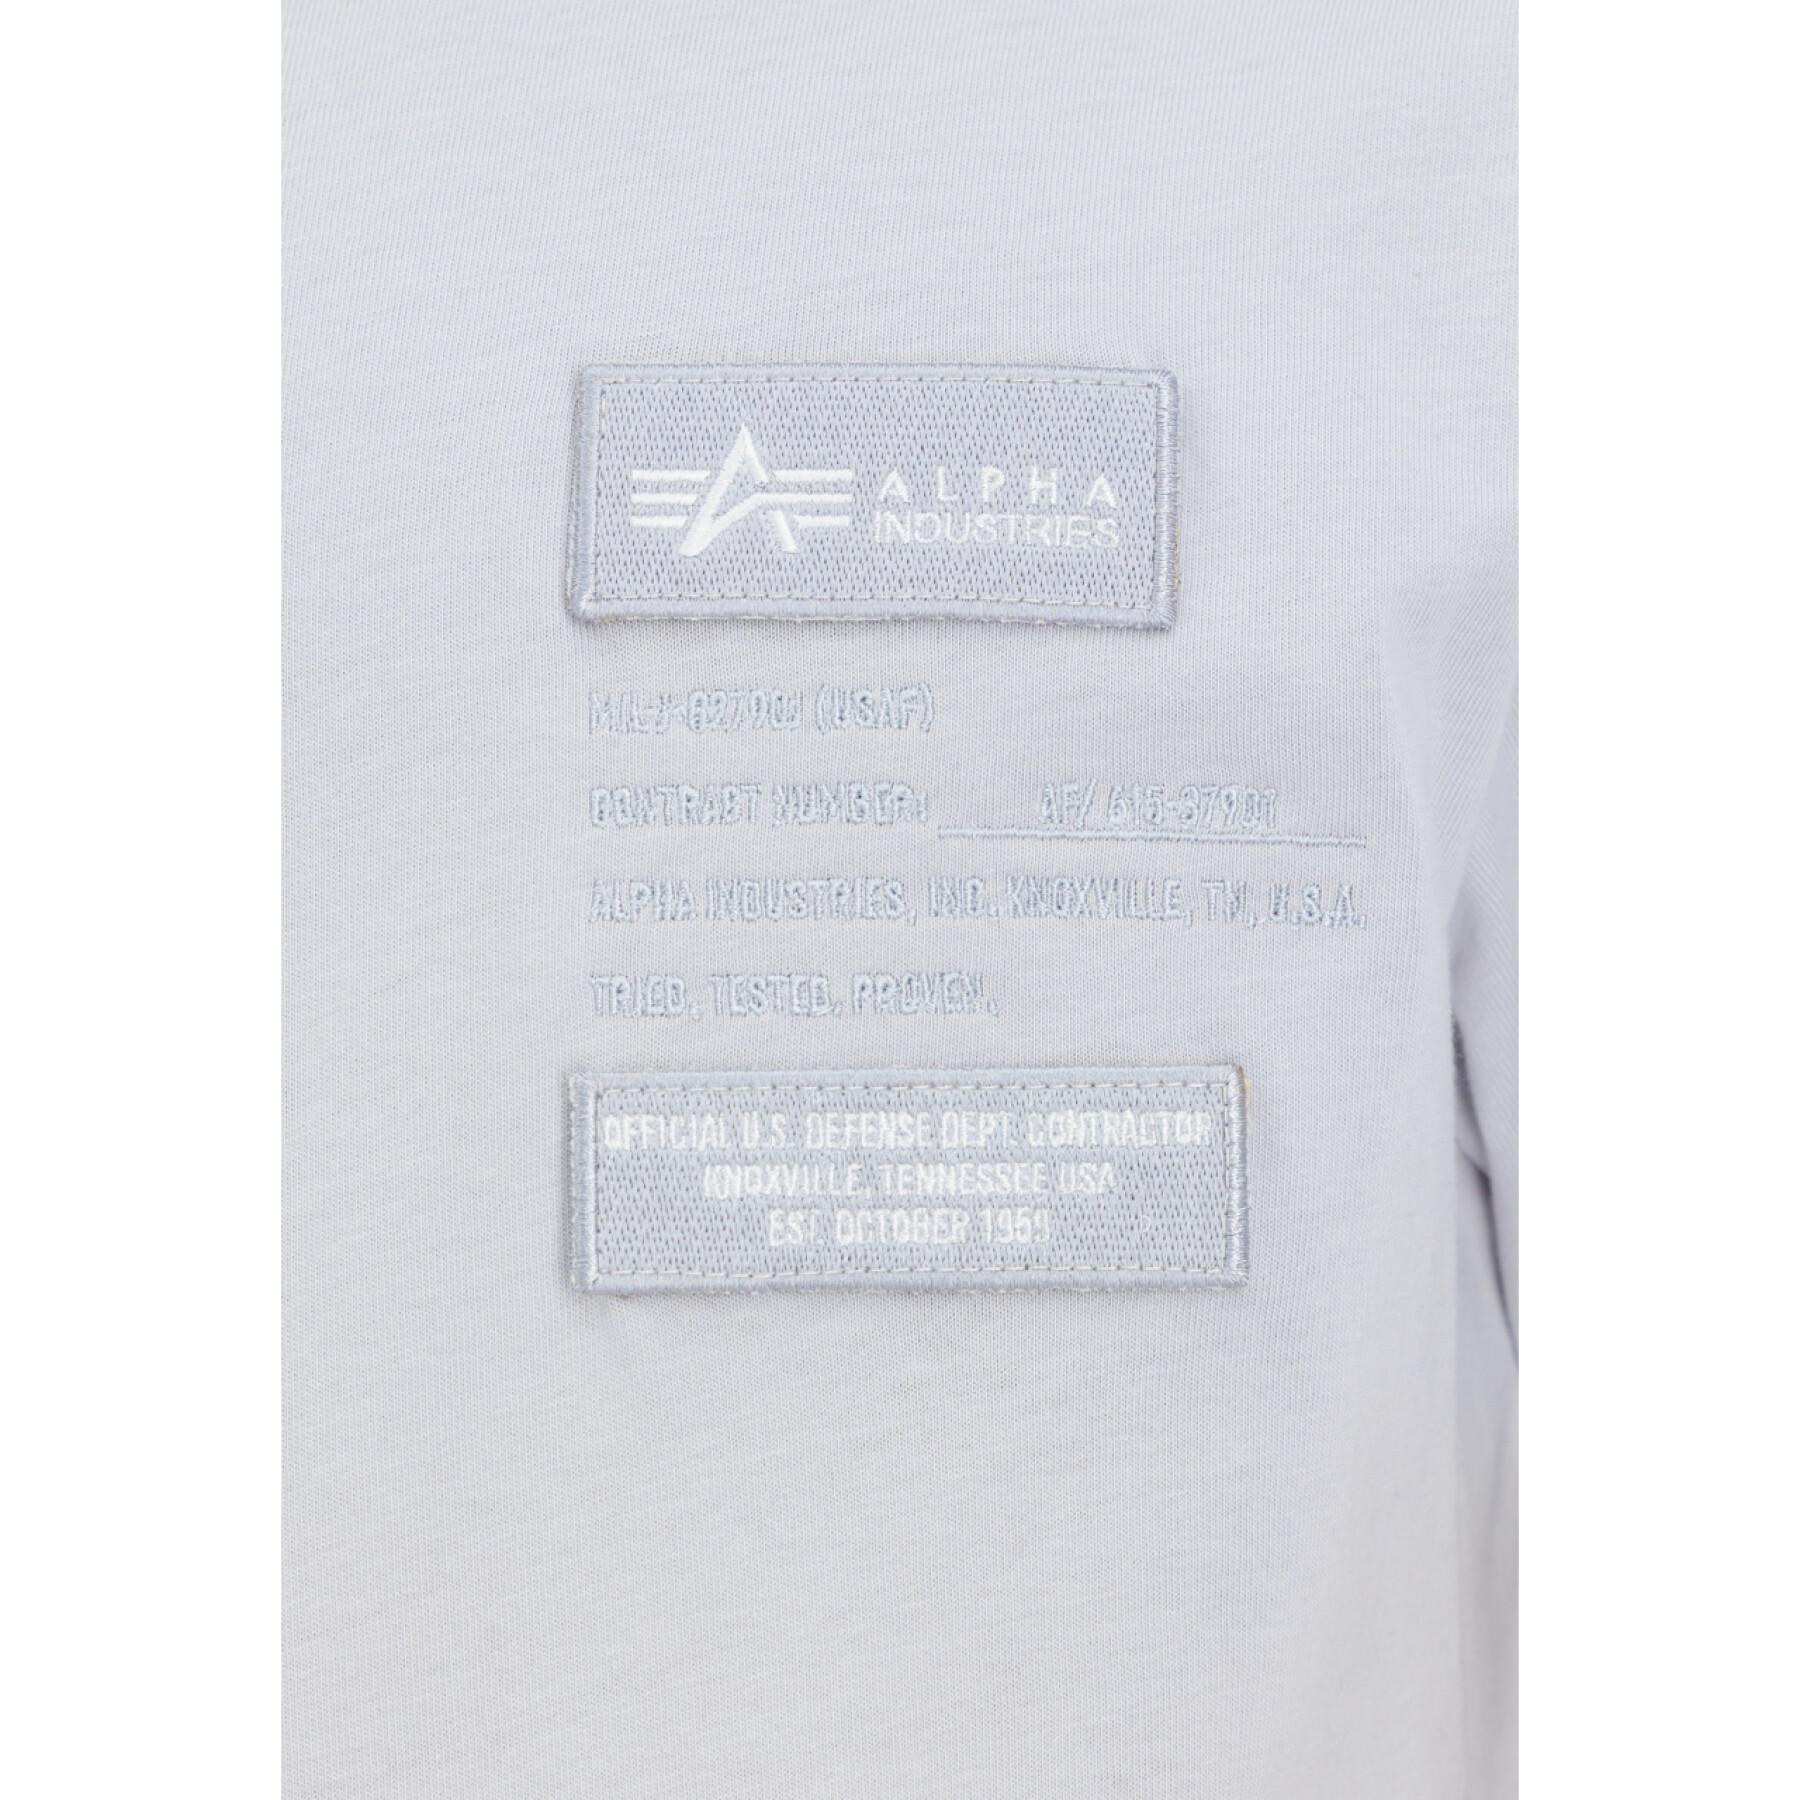 Alpha Man - - shirts - LF T-shirts Industries T-shirt Polo Patch and Lifestyle